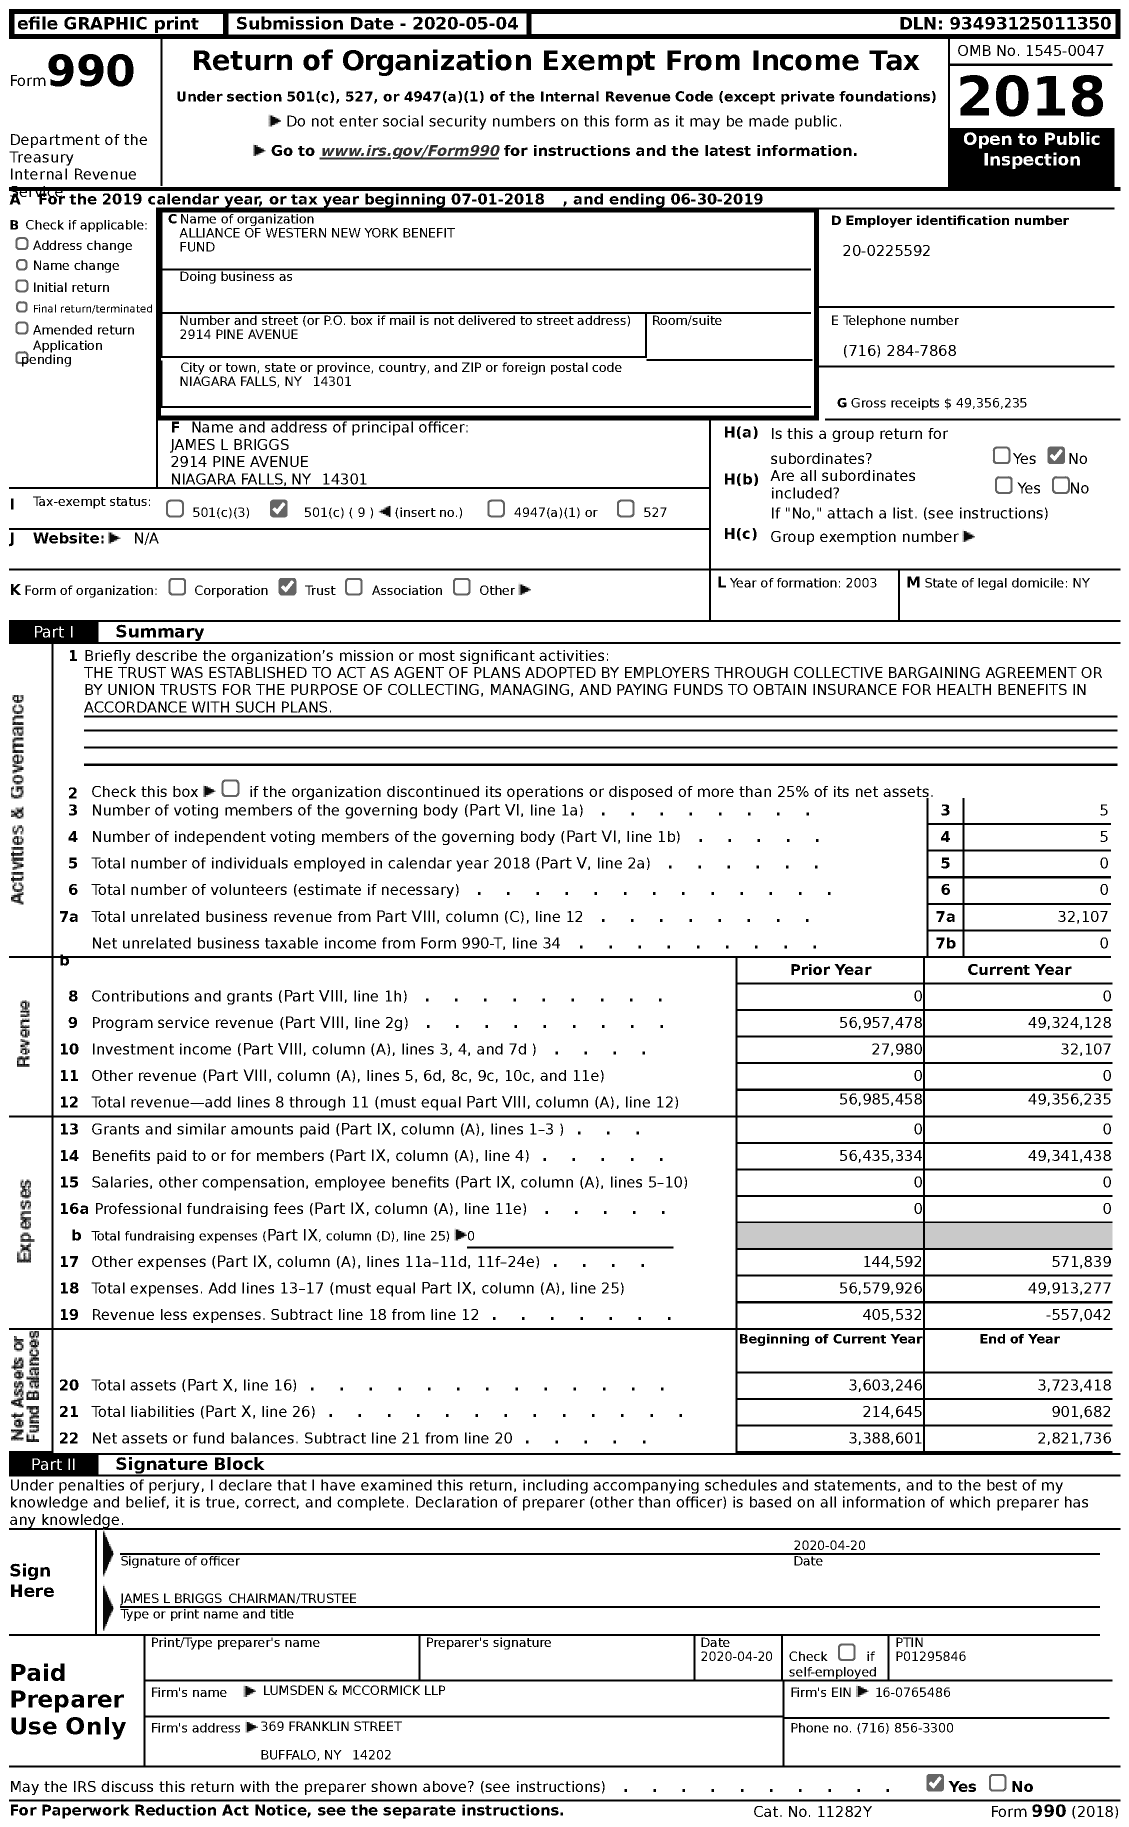 Image of first page of 2018 Form 990 for Alliance of Western New York Benefit Fund